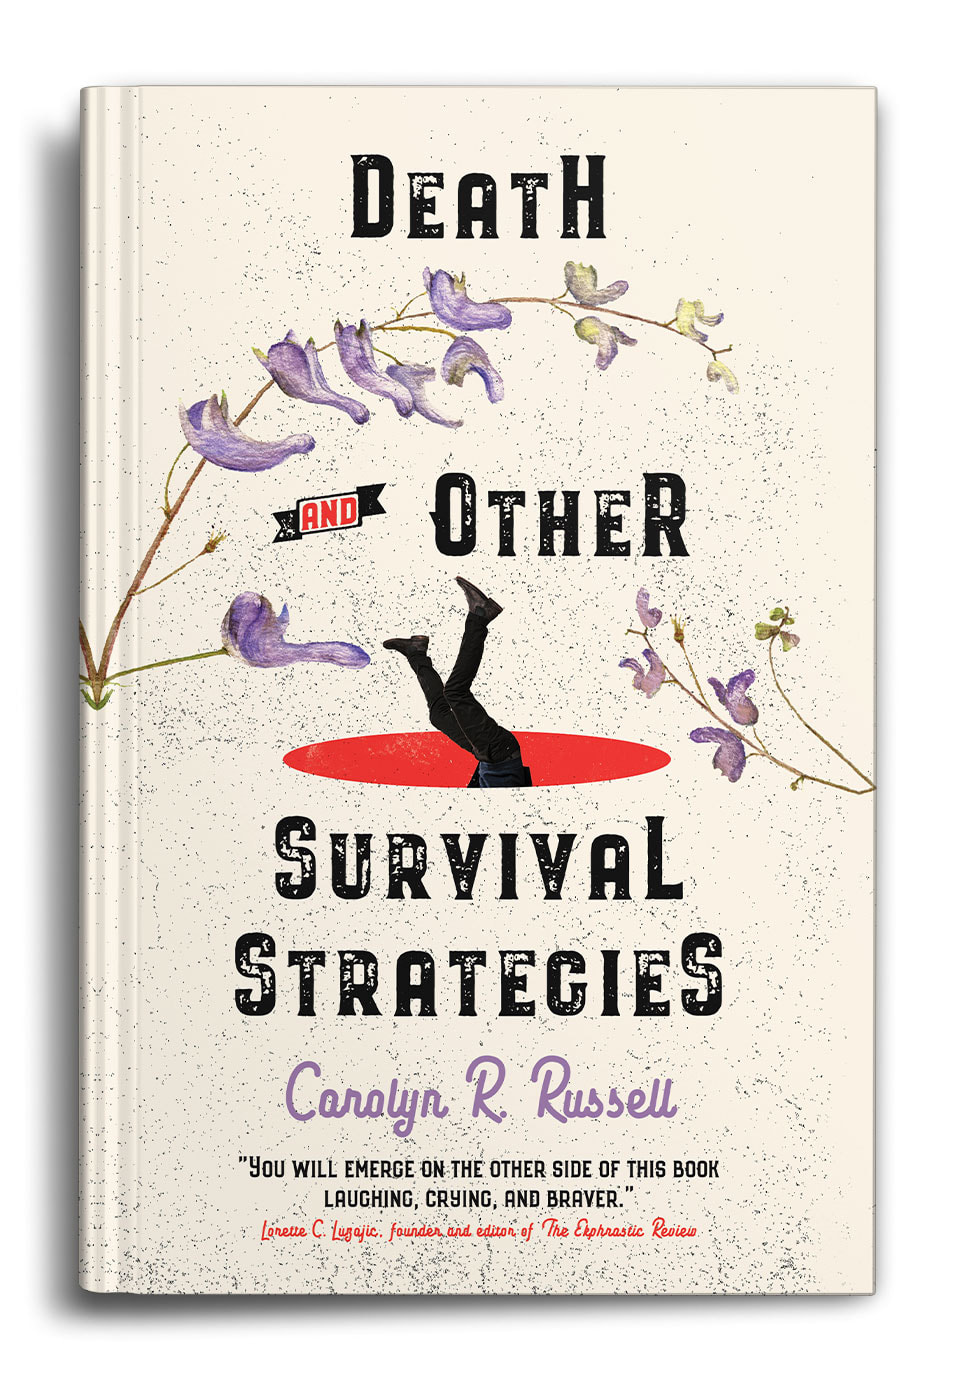 Death-and-Other-Survival-Strategies-by-Carolyn-R-Russell